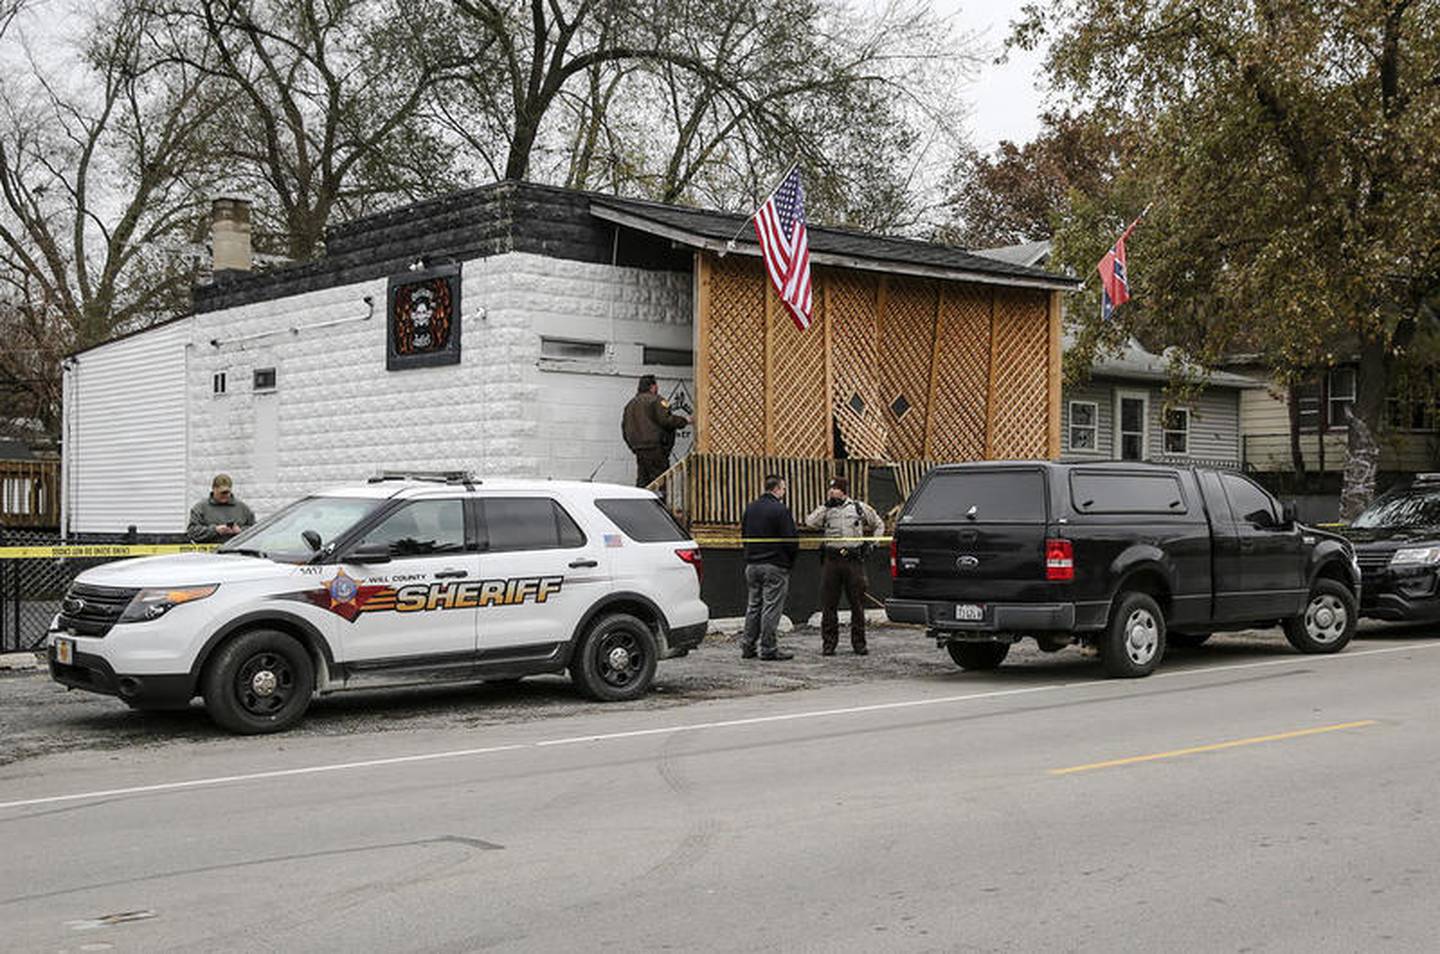 Will County investigators search the Outlaws Motorcycle Club's clubhouse Thursday, Nov. 16, after Kaitlyn Kearns, a 24-year-old bartender from Joliet, was found dead from a gunshot in a rural area of Kankakee County, according to a sheriff’s office news release.